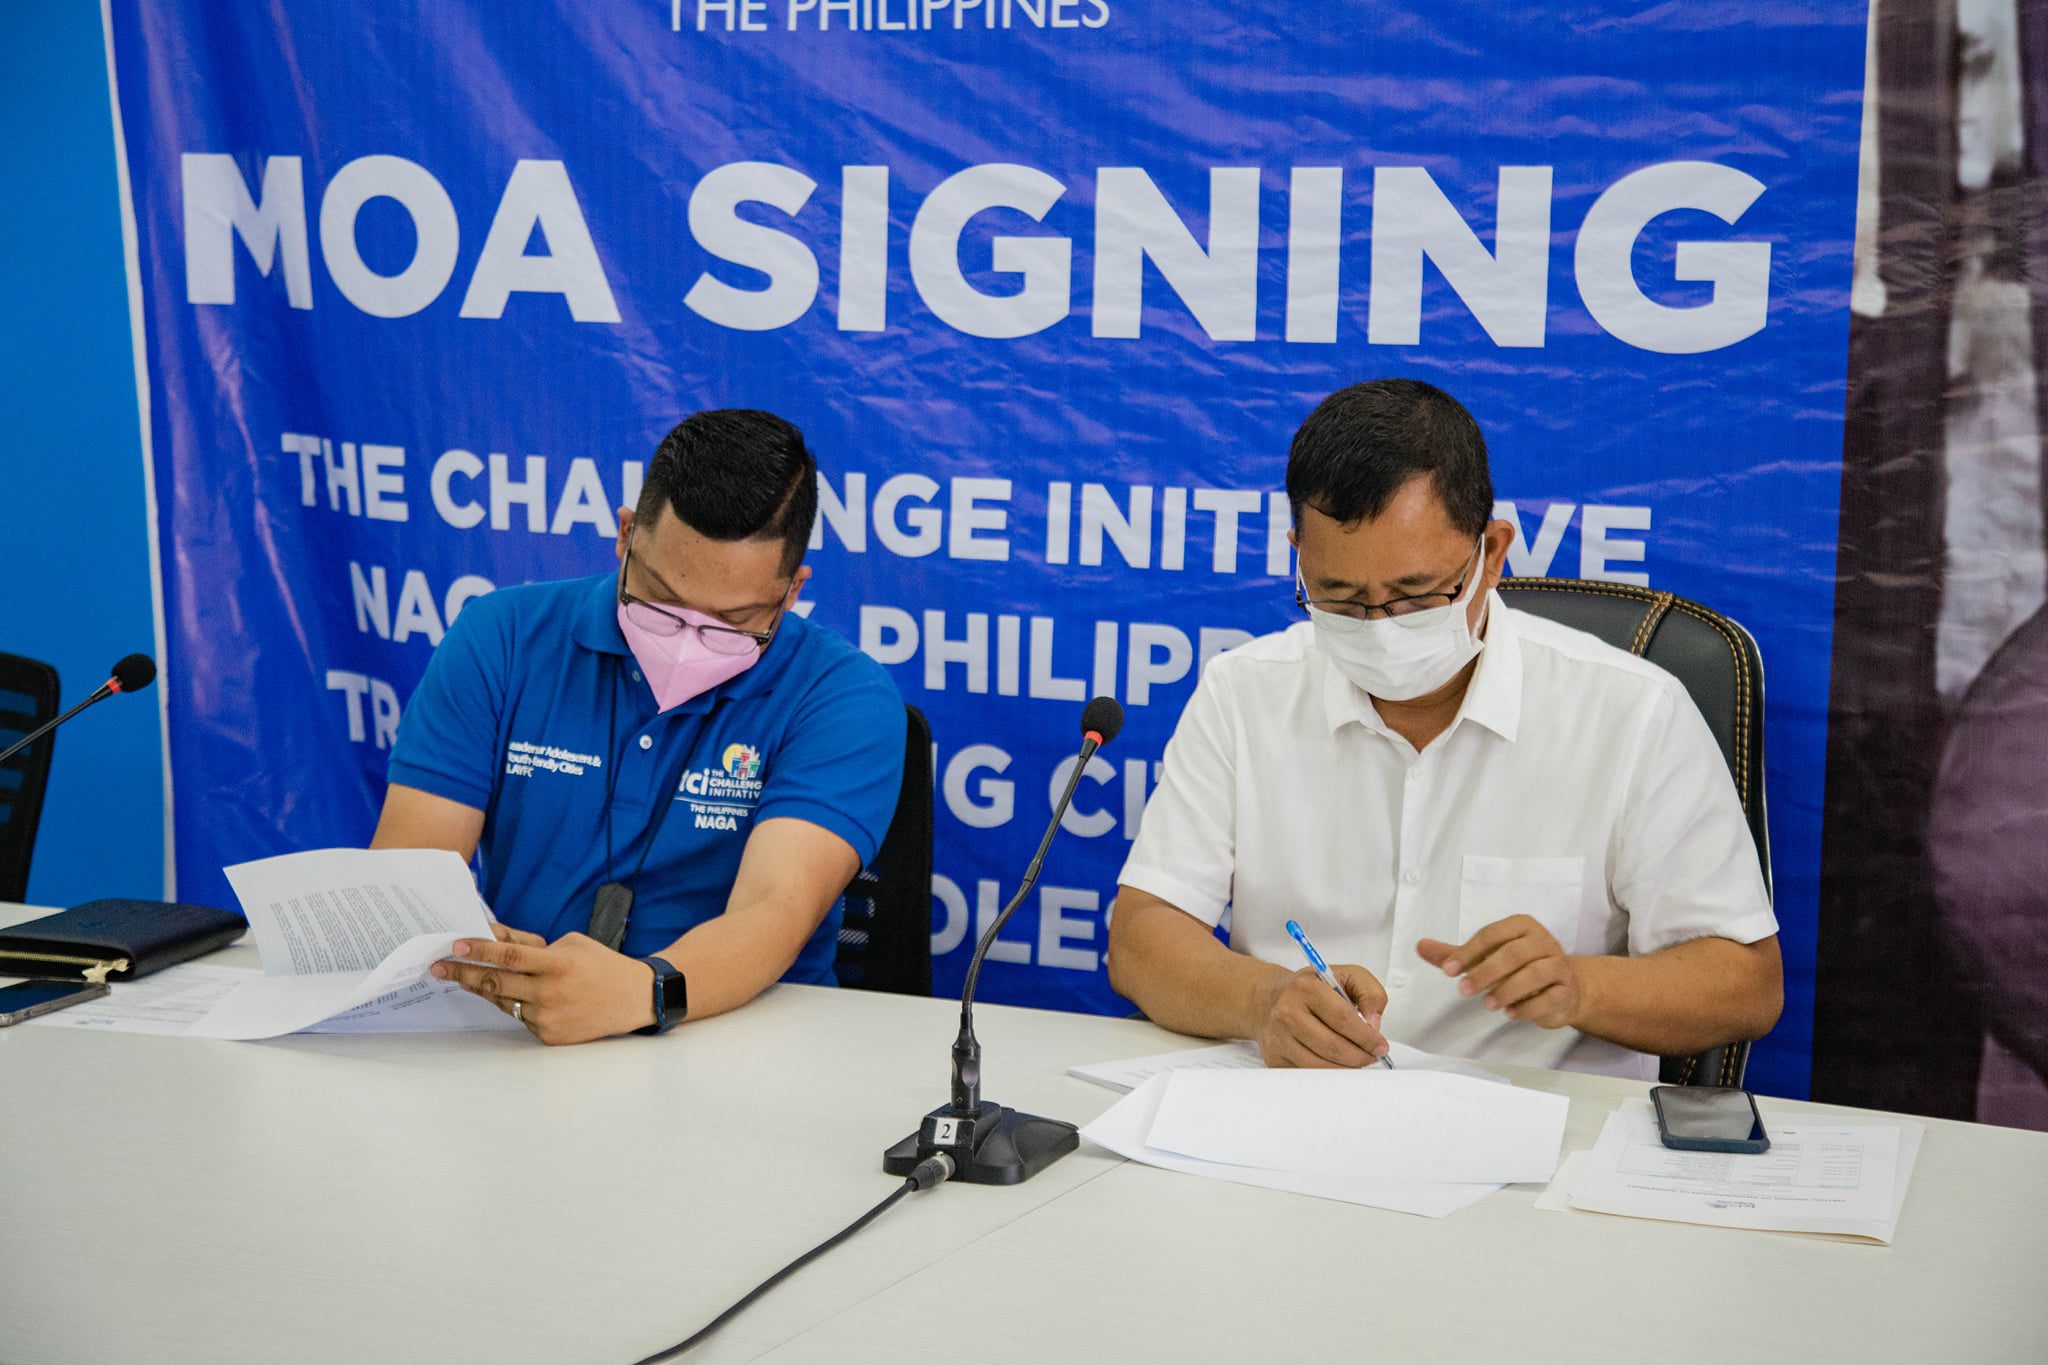 CPNO Head, Ray-an Cydrick Rentoy and City Mayor, Nelson Legacion, during the MOA Signing for Teenage Pregnancy Eradication last January 27, 2022 at the CMO Conference Room, City Hall Compound.